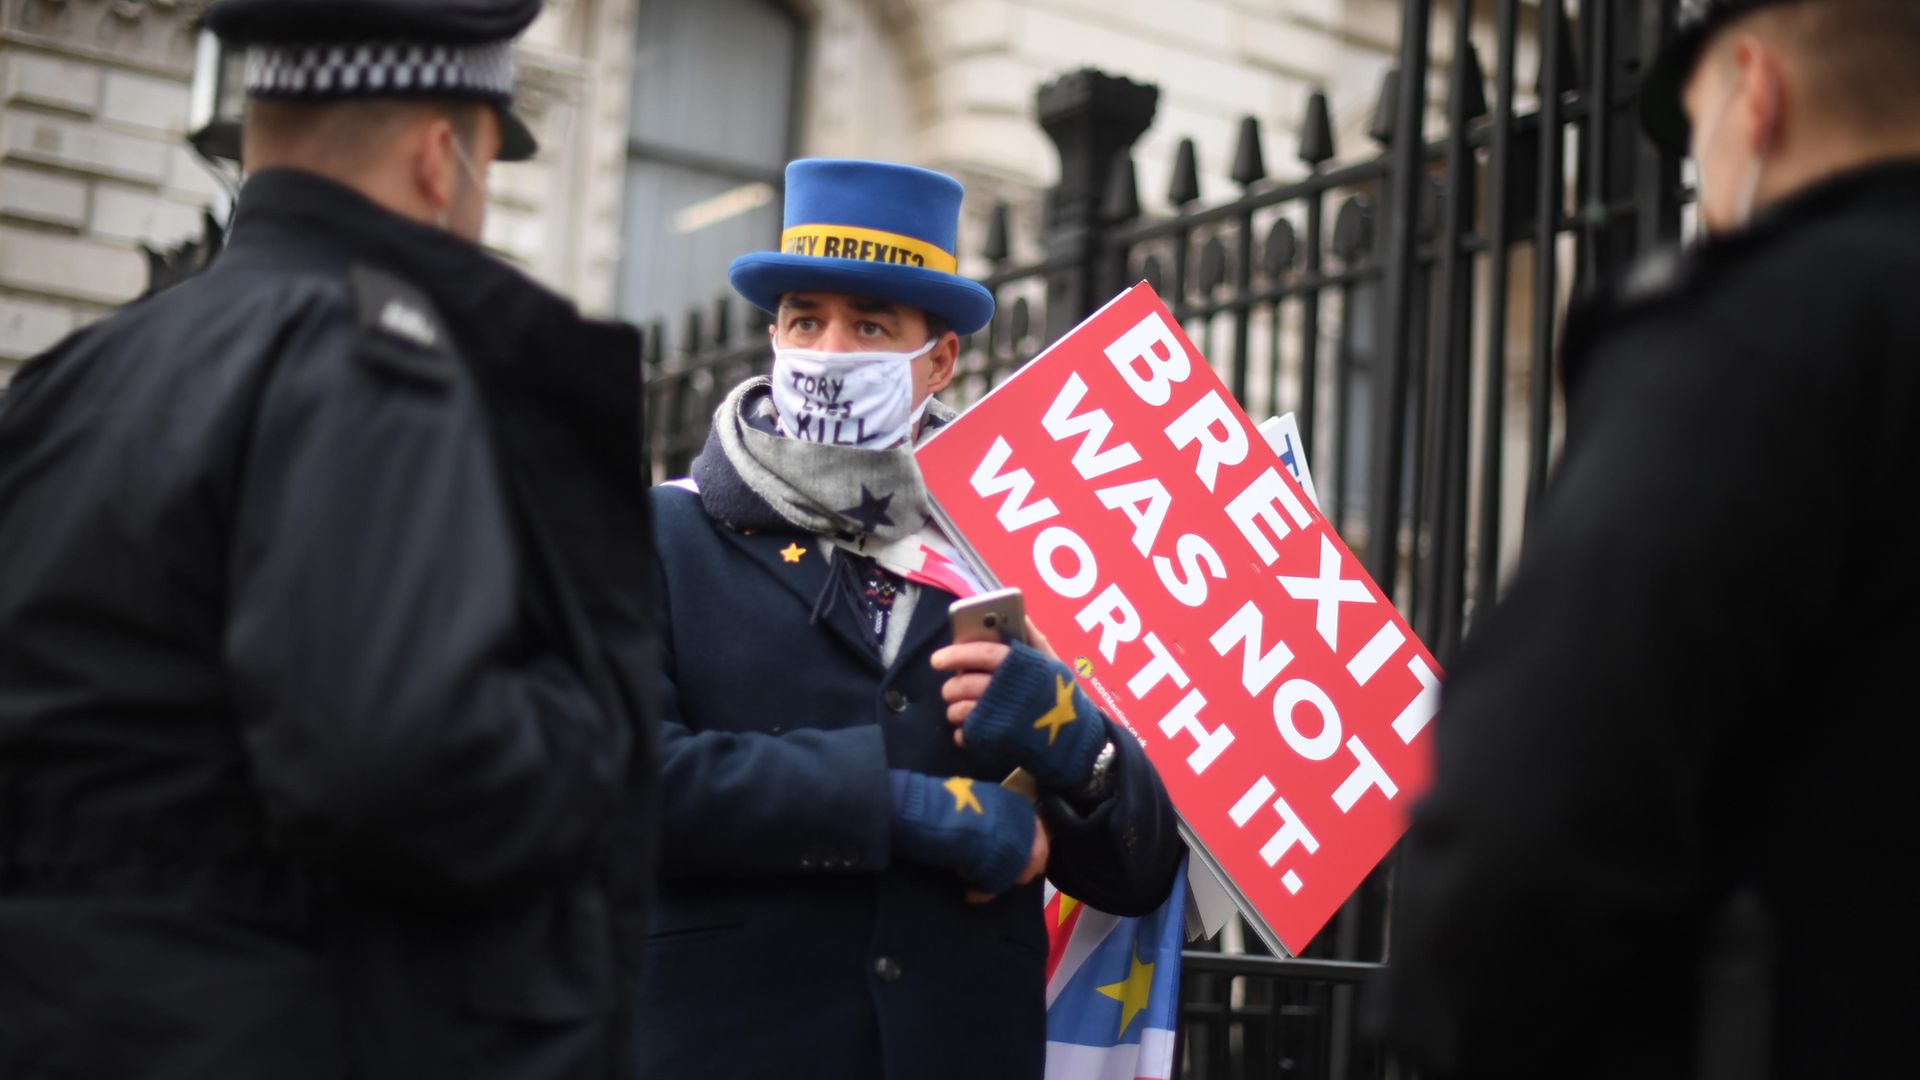 Police officers speak to an anti-Brexit protester at the gates of Downing Street, London - Credit: PA